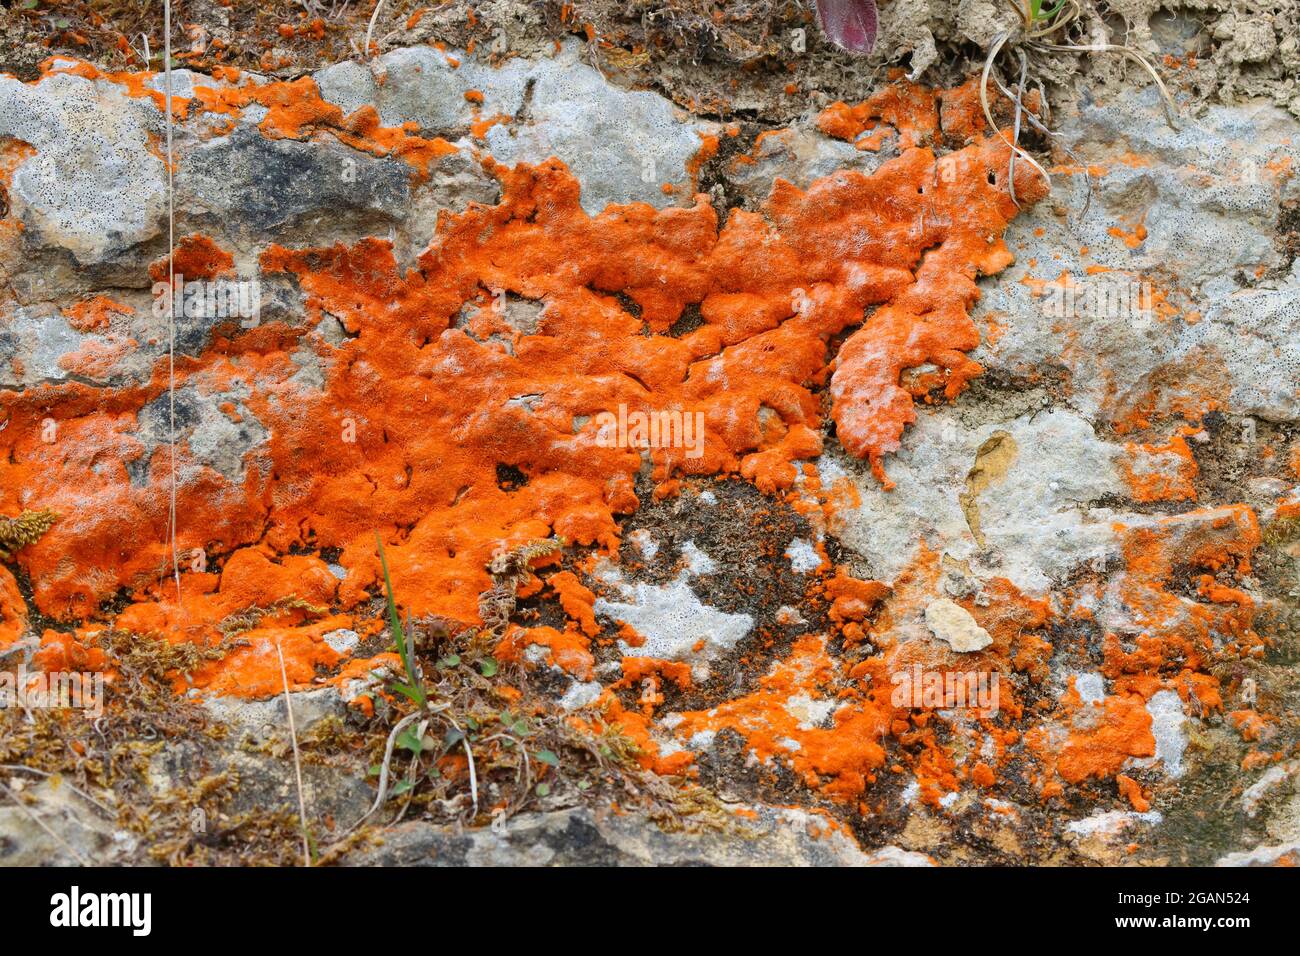 Orange Lichen Fungi growing on a Rock in a Nature Reserve, County Durham, England, UK. Stock Photo